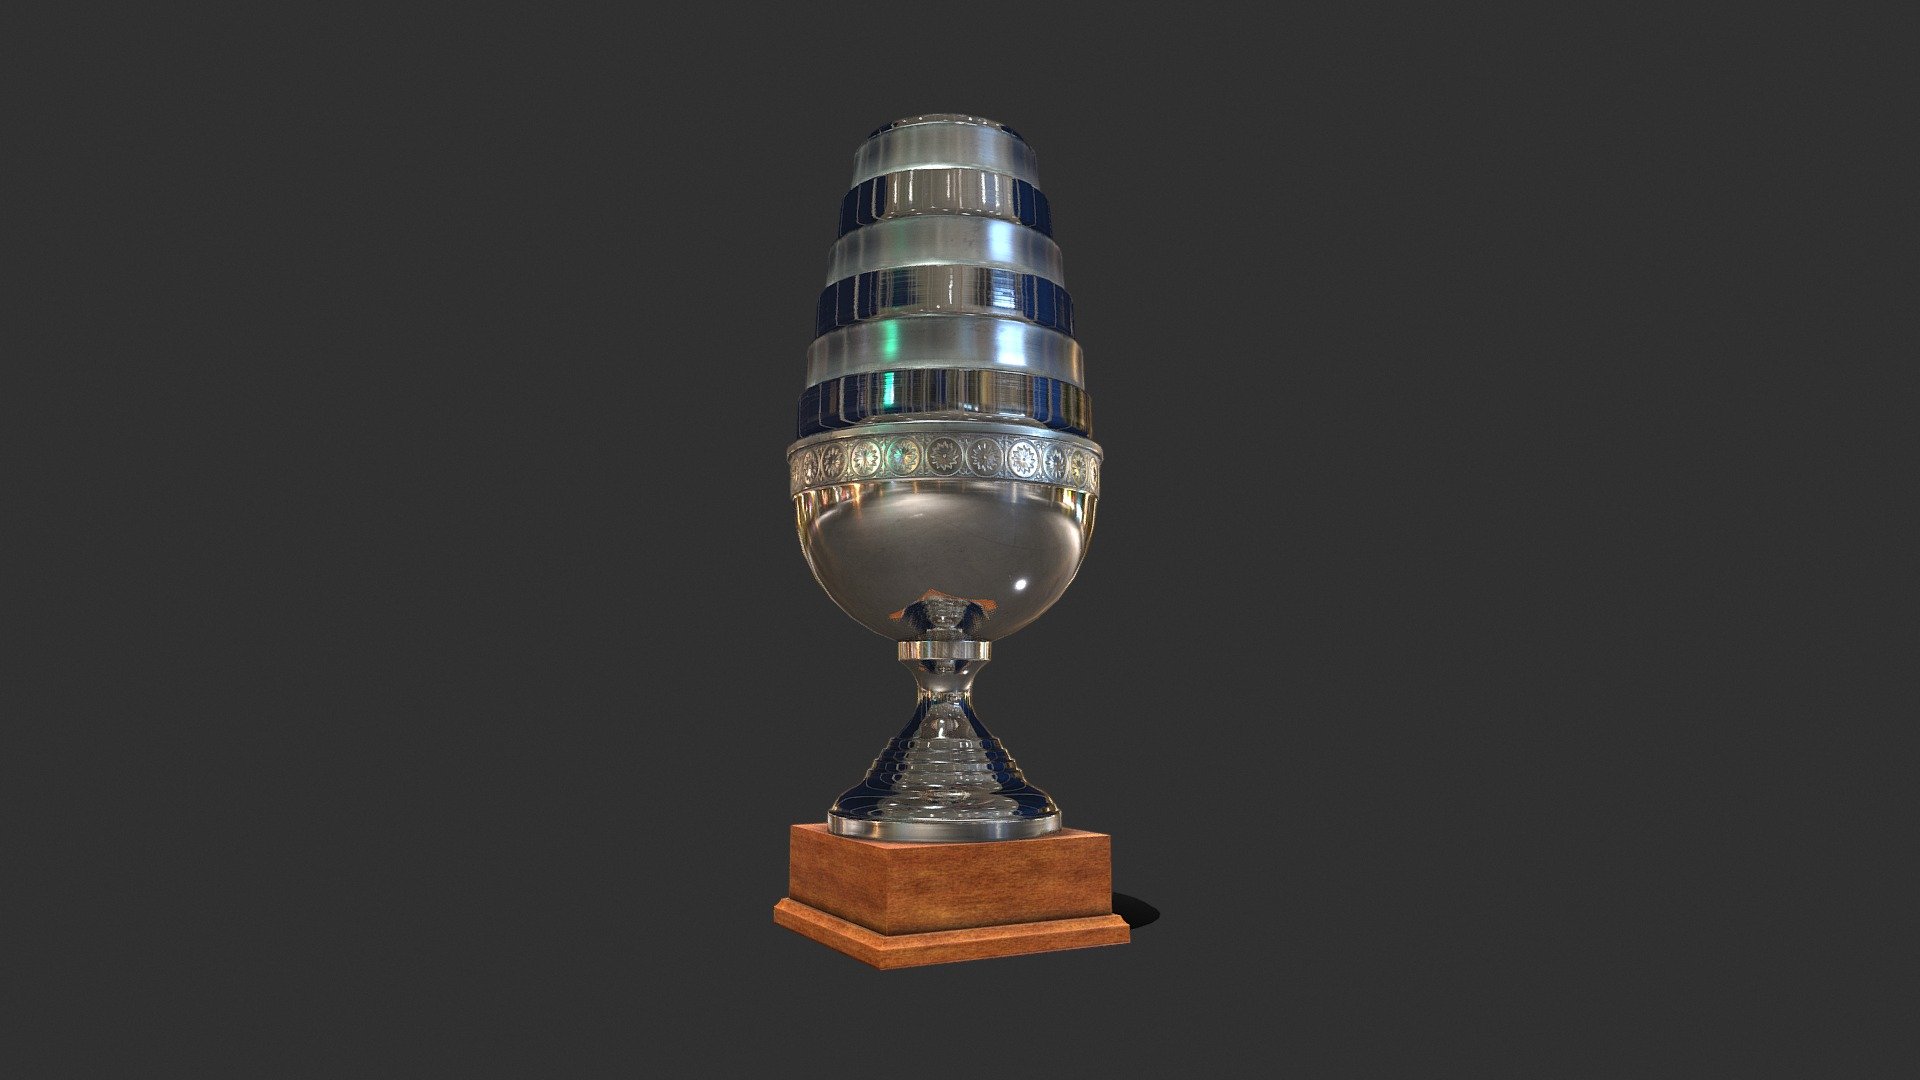 3D model of ESL ESL Trophy PBR
- 4k Resolution of textures
- Originally created with 3ds Max 2018 
- Textured created with Substance Painter 


Texture Set: 
Diffuse, Base Color, IOR, gloss, heigh, ior, normal, reflection, specular, AO, metallic, roughness
Special notes: 
.fbx format is recommended for import in other 3d software. If your software doesn't support .fbx format, please use 3ds format; .obj, format was exported from 3ds Max. 
The geometry for .obj format is set to tris.
 - ESL Trophy PBR - Buy Royalty Free 3D model by danielmikulik 3d model